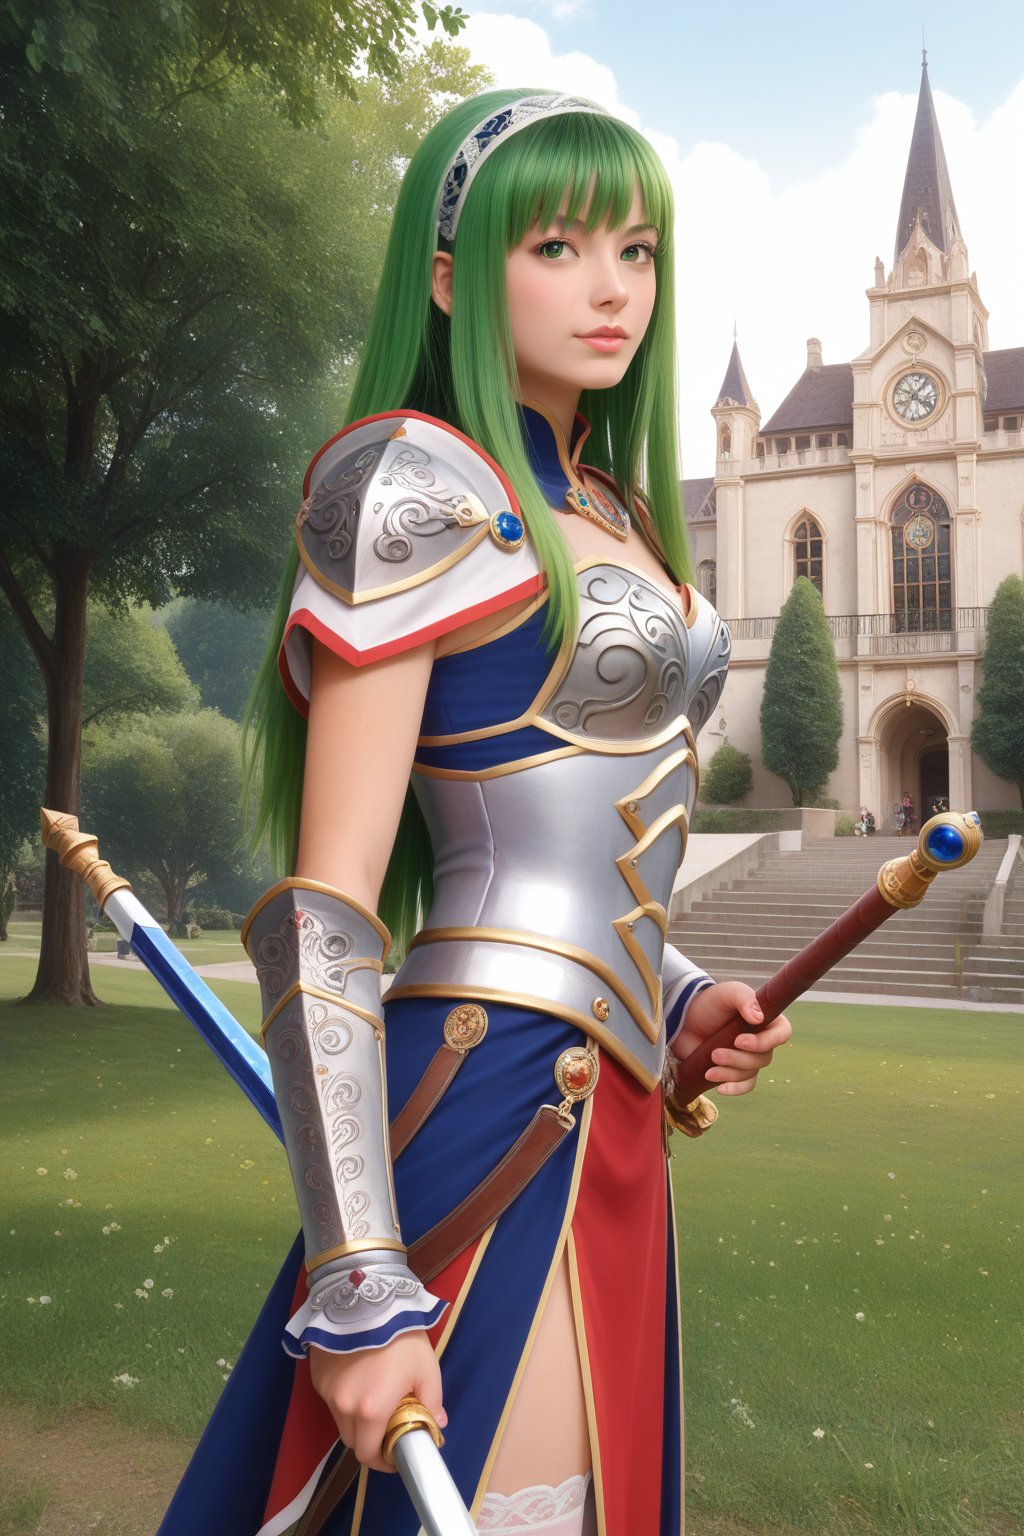 score_9, score_8_up, score_8, masterpiece, official art, ((ultra detailed)), (ultra quality), high quality, perfect face, 1 girl with long hair, blond-green hair with bangs, bronze eyes, detailed face, wearing a fancy ornate (((folk dress))), shoulder armor, armor, glove, hairband, hair accessories, striped, (holding the great weapon :1.7), jewelery, thighhighs, pauldrons, side slit, capelet, vertical stripes, looking at viewer, fantastical and ethereal scenery, daytime, church, grass, flowers. Intricate details, extremely detailed, incredible details, full colored, complex details, hyper maximalist, detailed decoration, detailed lines, best quality, HDR, dynamic lighting, perfect anatomy, realistic, more detail, Architecture, full juicy lips, good teeth, perfect green eyes, (kawaii face), DonMM1y4XL,NelZelpher_SO3,nel zelpher